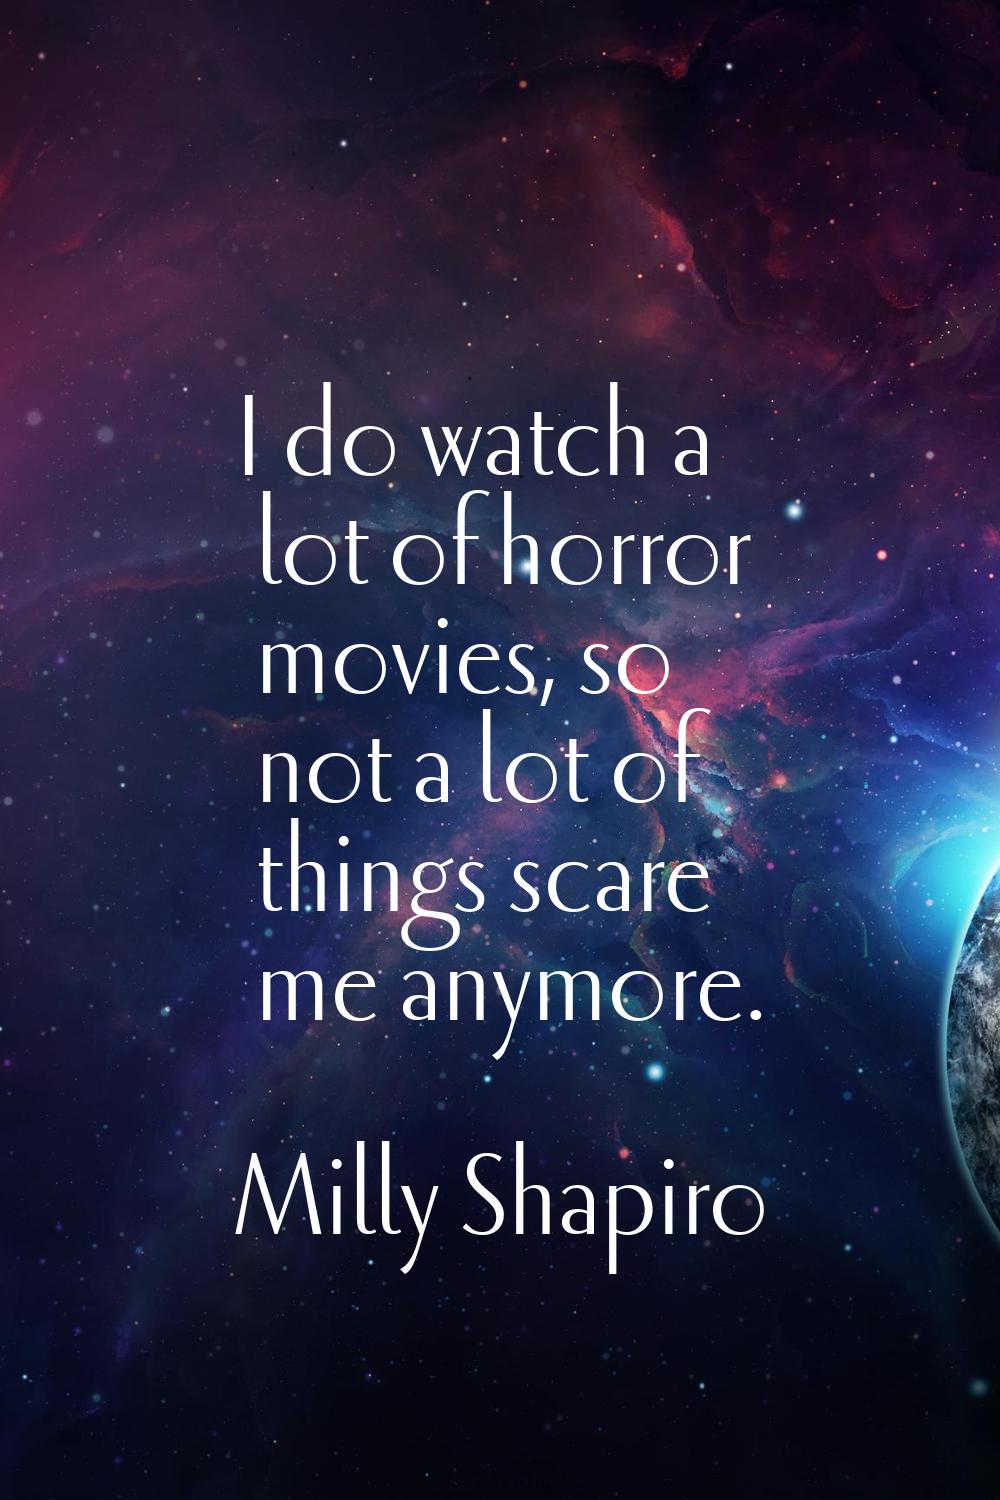 I do watch a lot of horror movies, so not a lot of things scare me anymore.